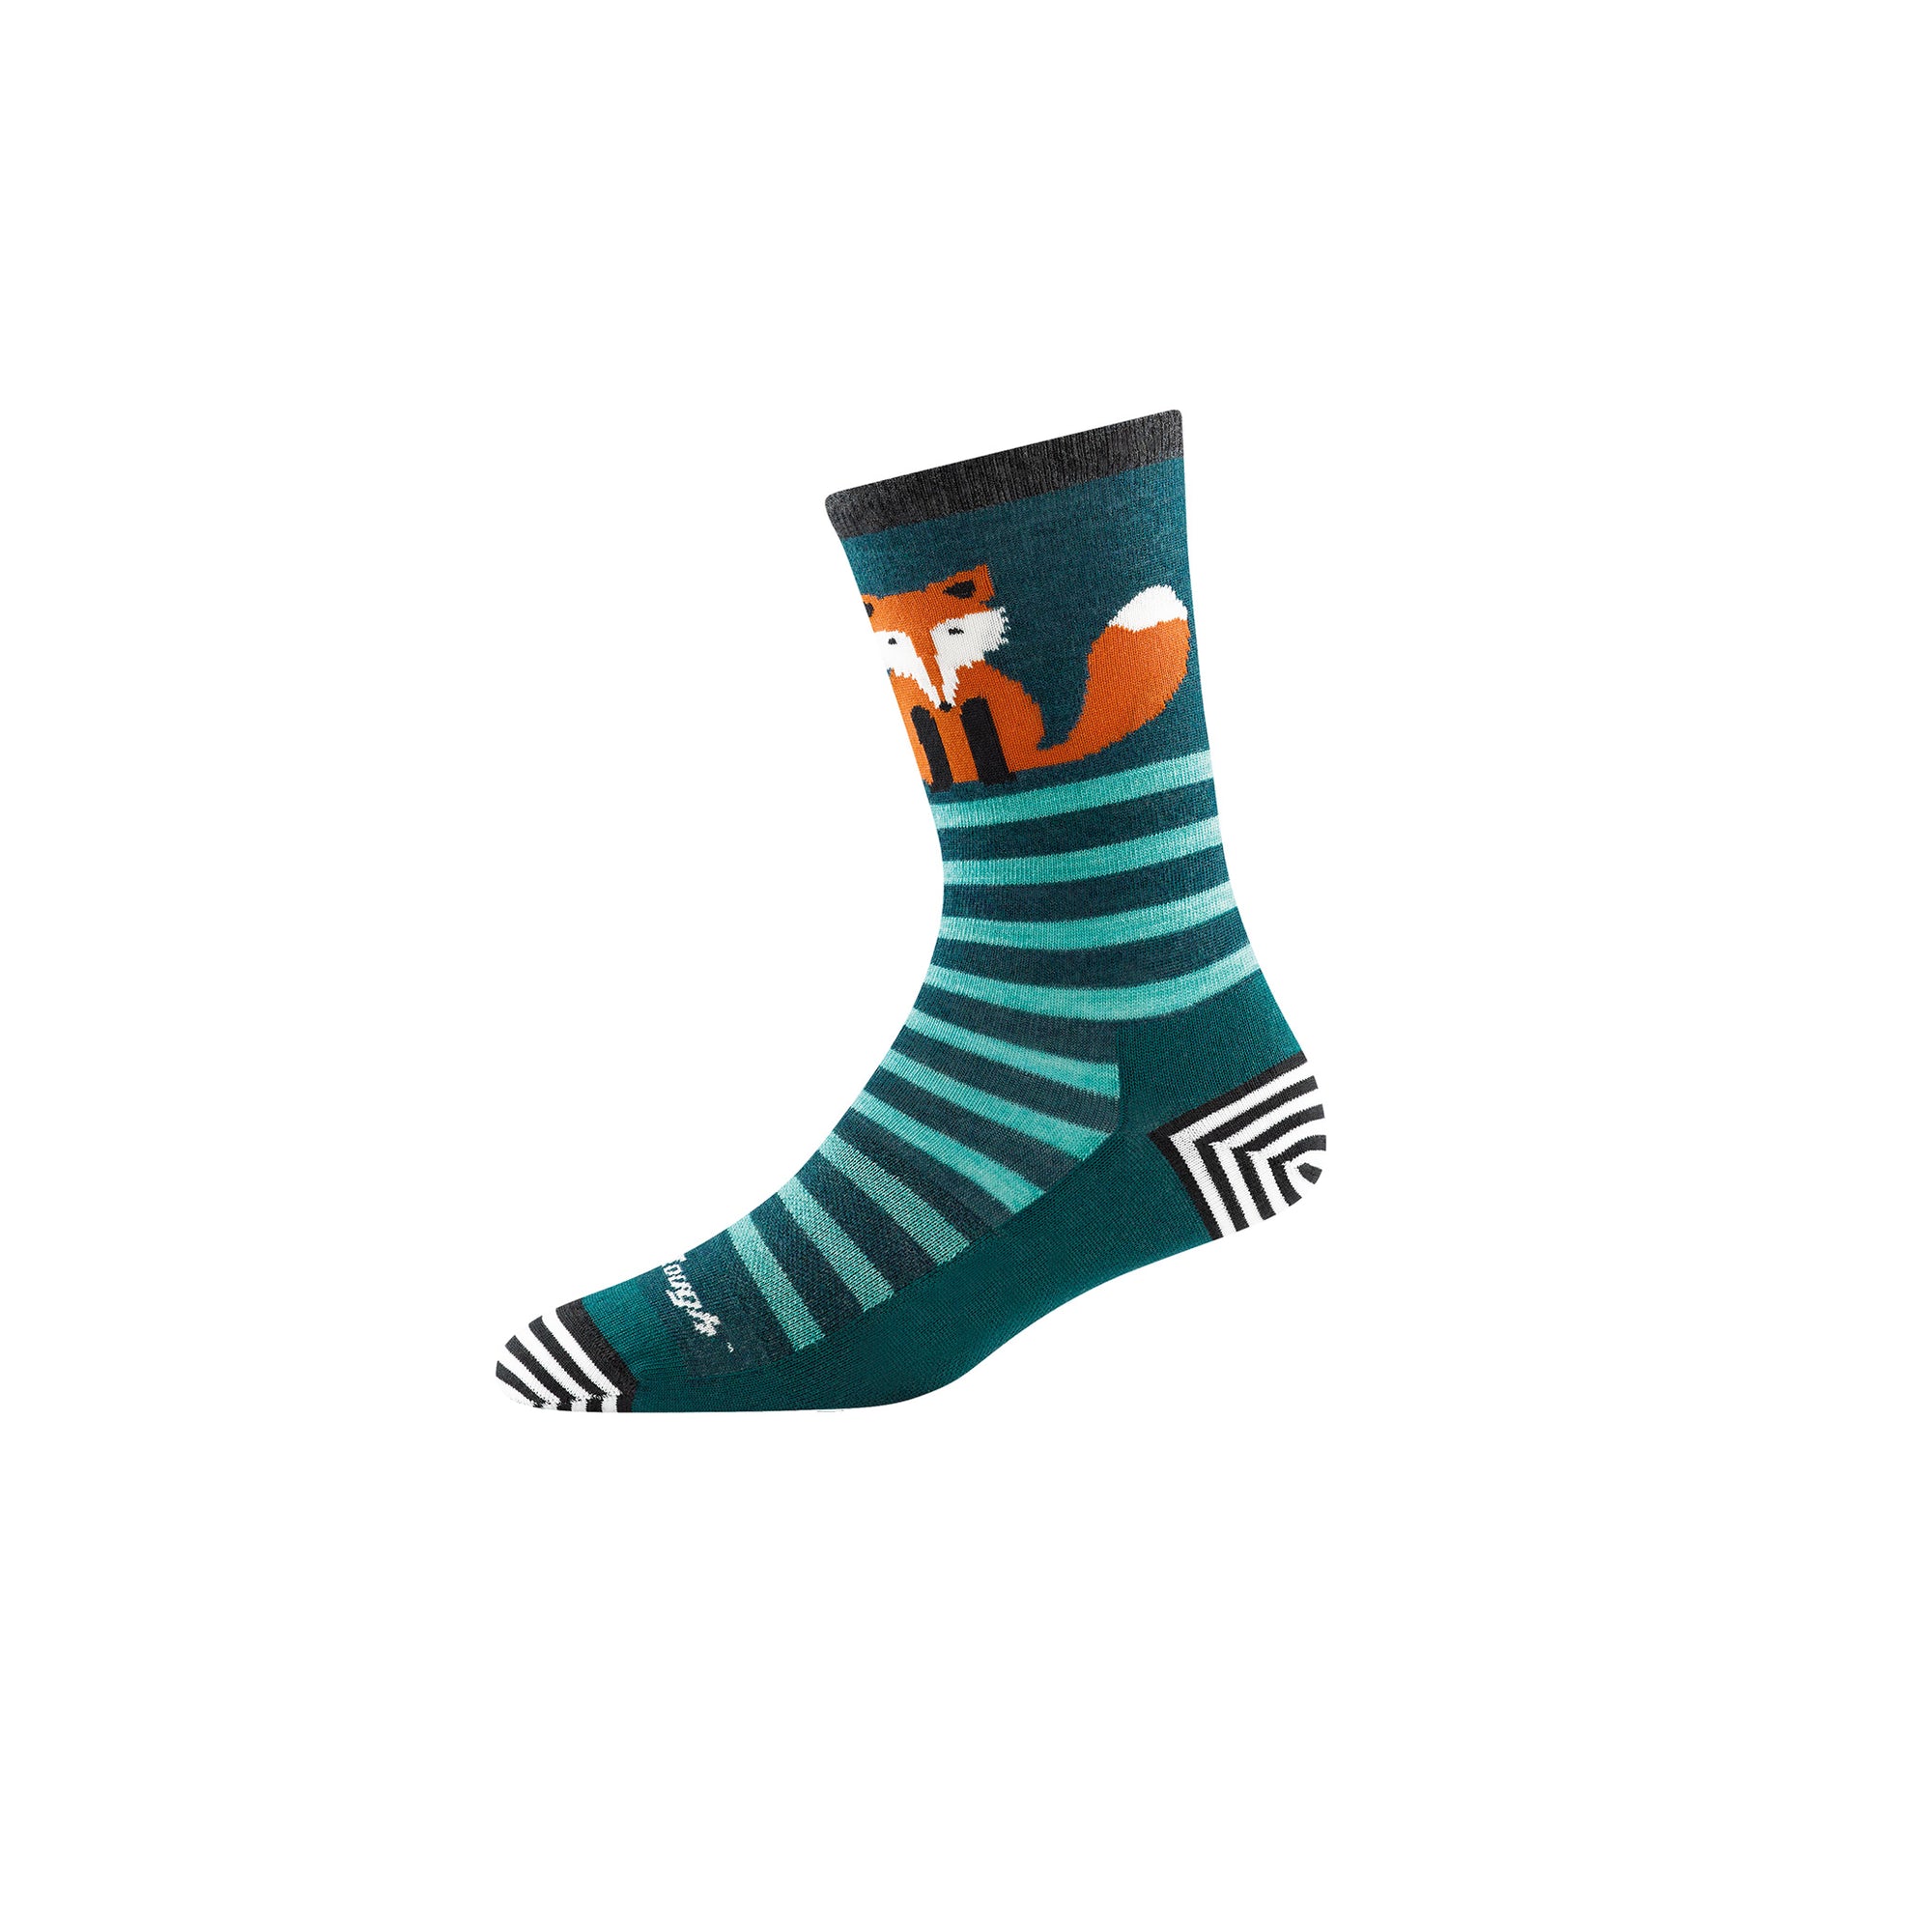 sideview of women's animal haus crew light socks in teal with stripes and fox graphic on ankle